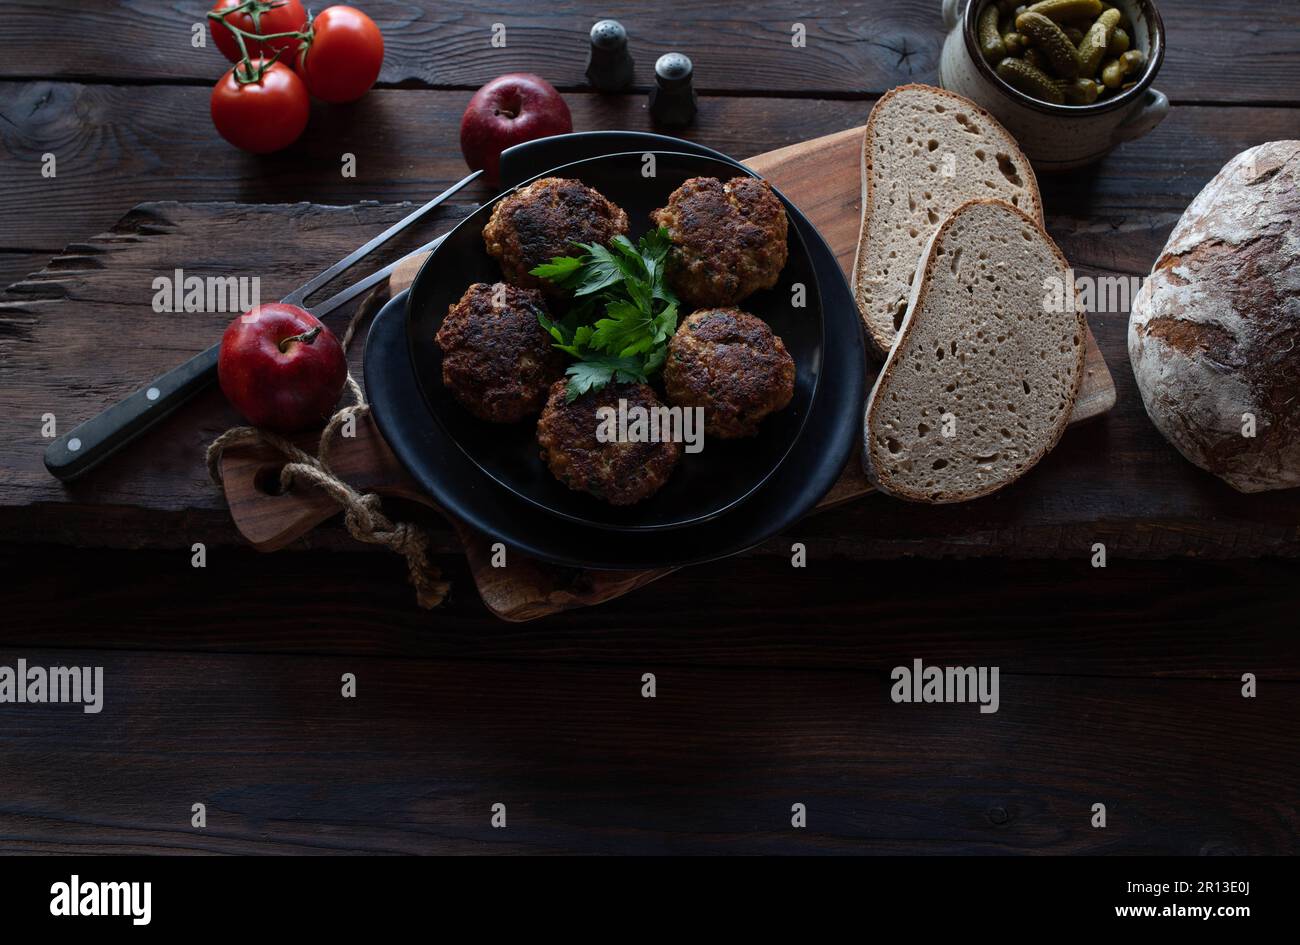 Rustic bread meal with german pork meatballs or frikadeller on rustic and dark wooden table background Stock Photo